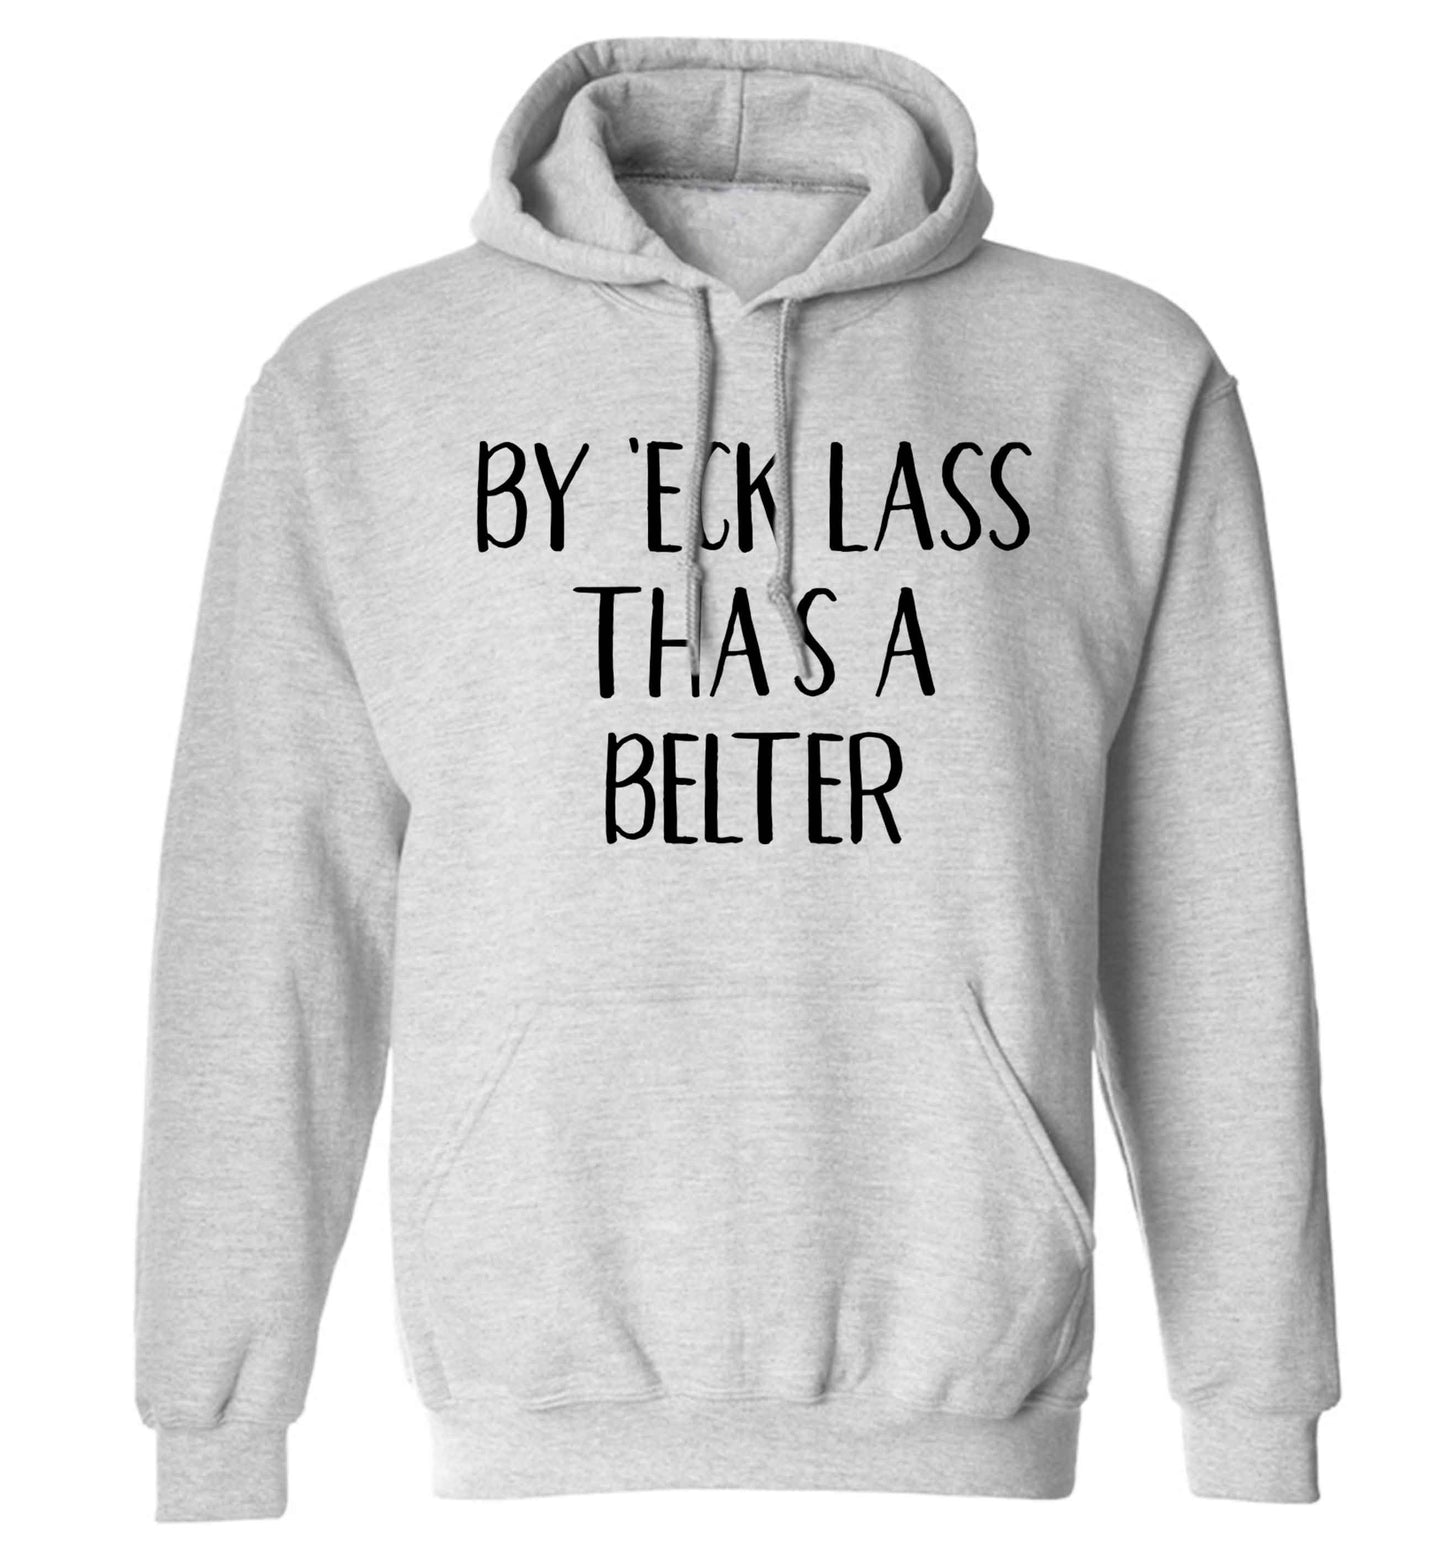 Be 'eck lass tha's a belter adults unisex grey hoodie 2XL